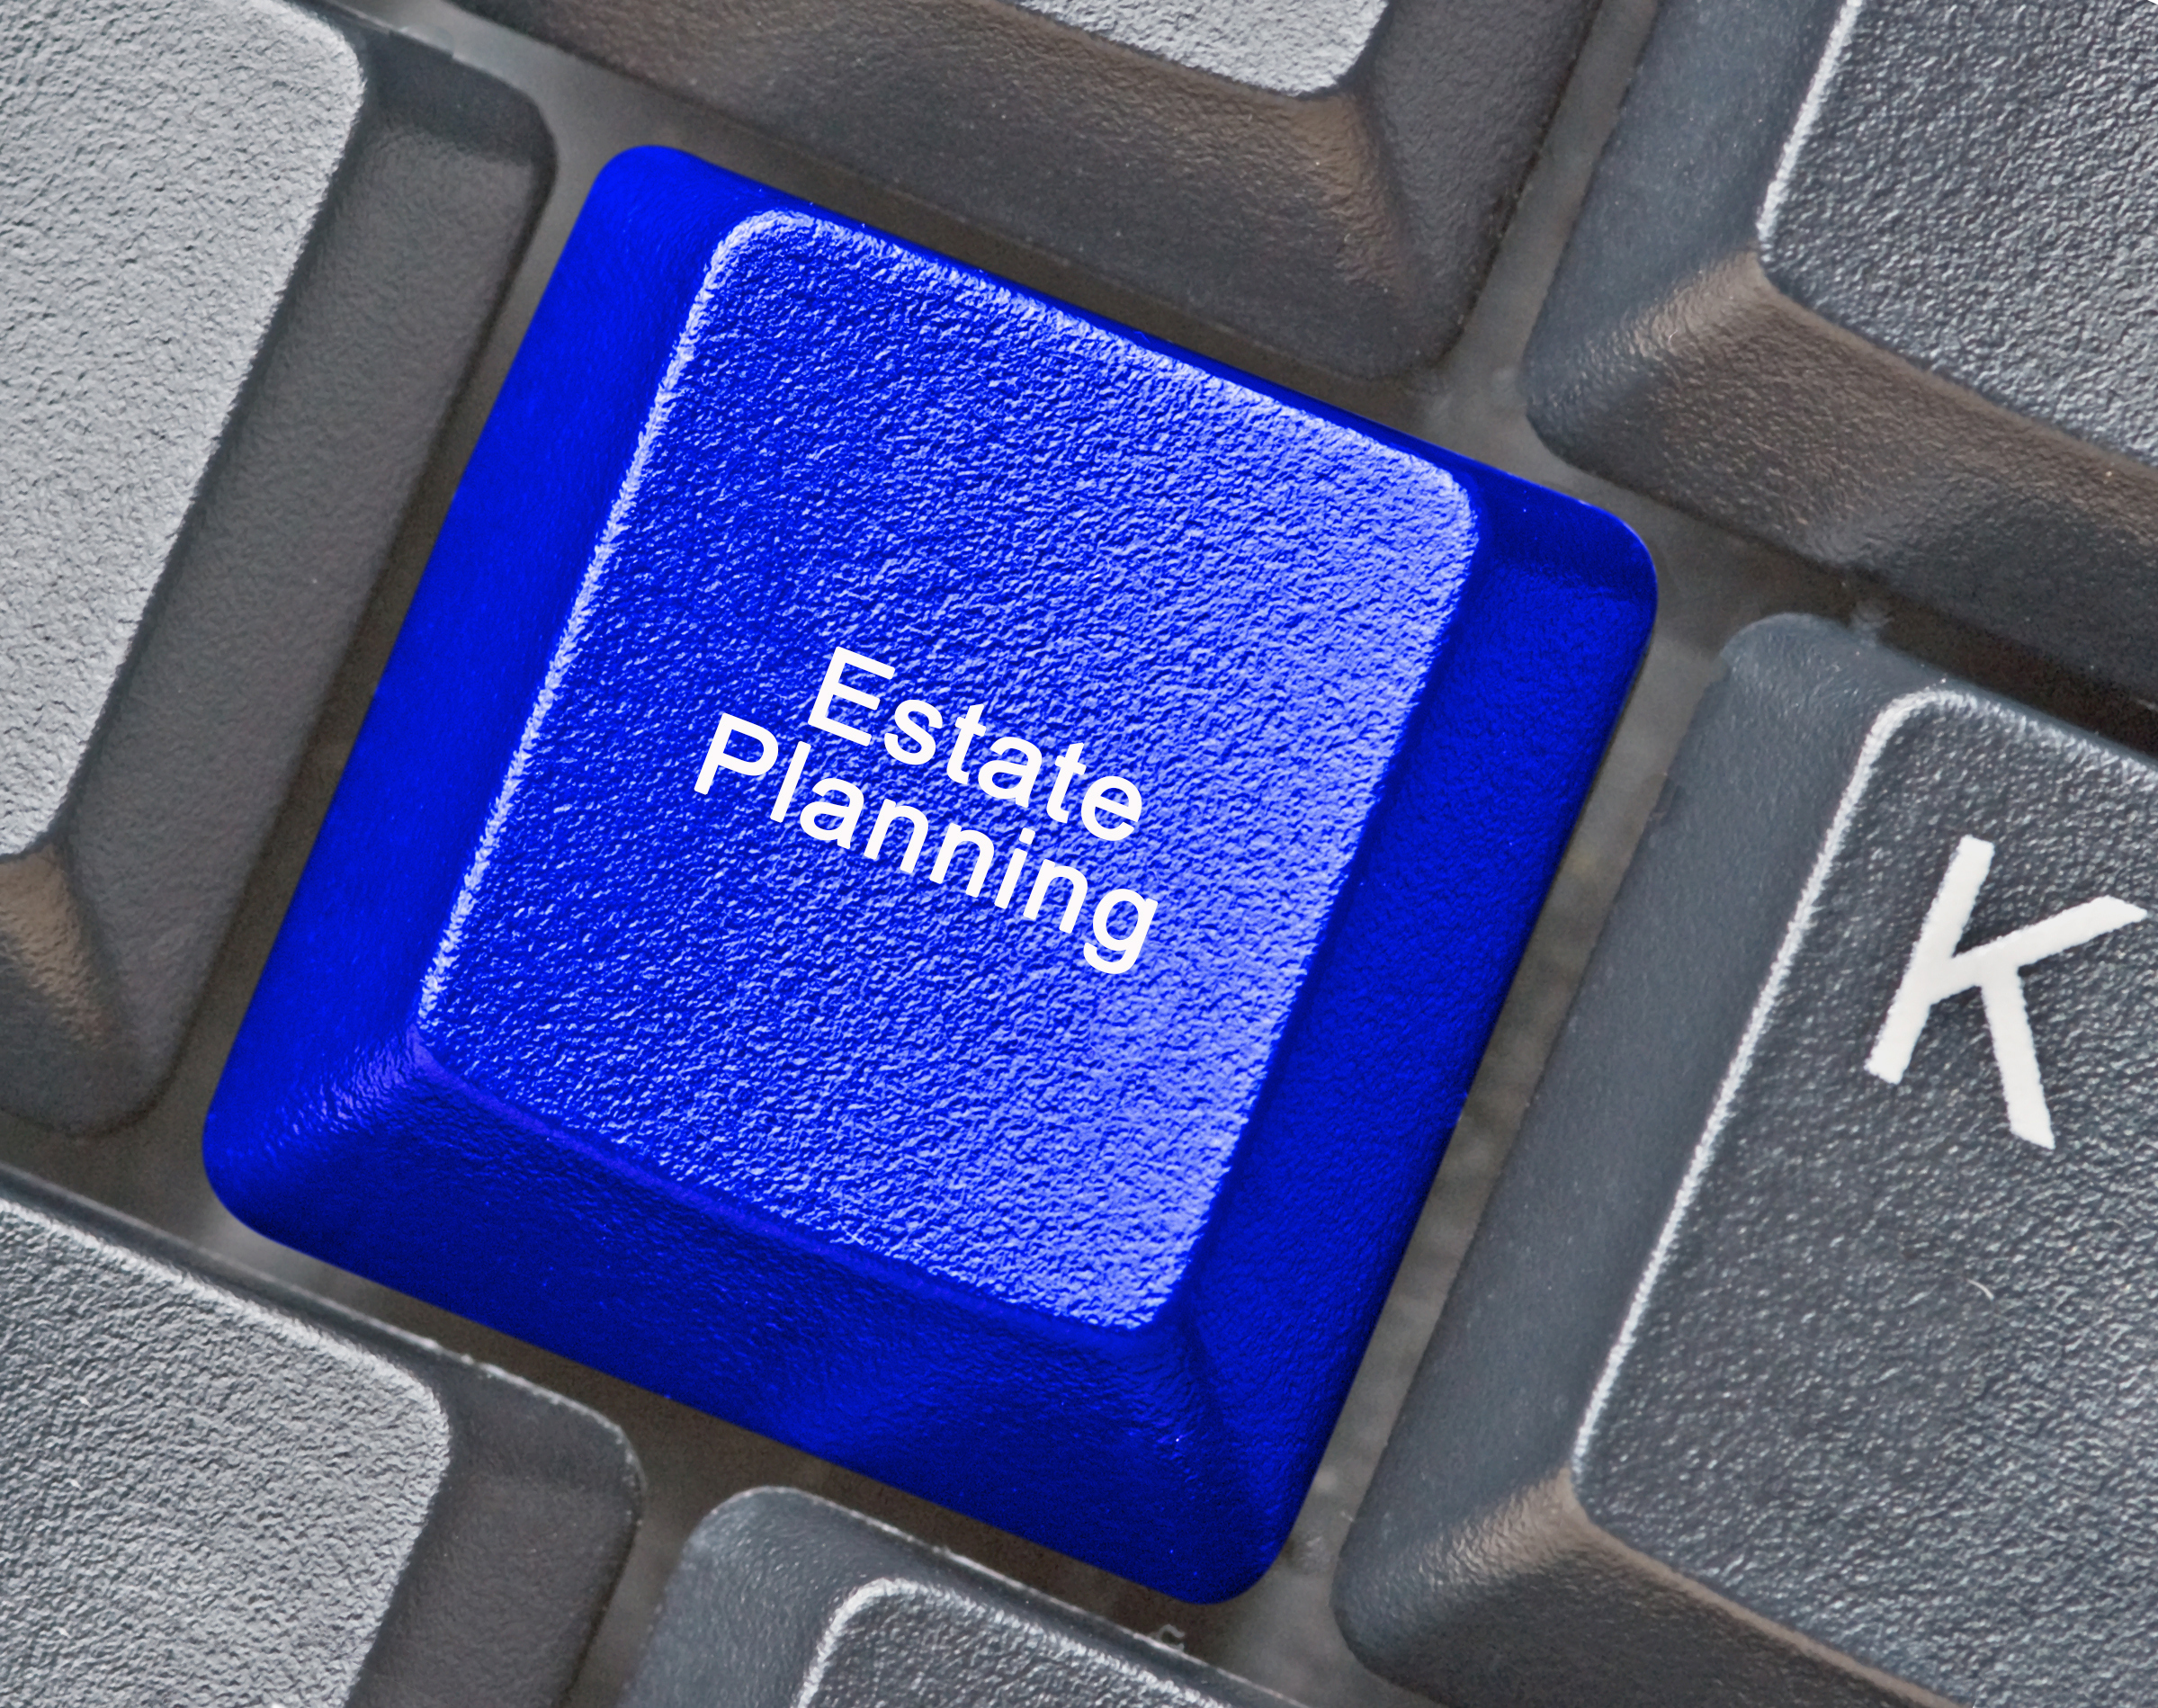 A Digital Estate Plan: What is it, and What Does it Involve?